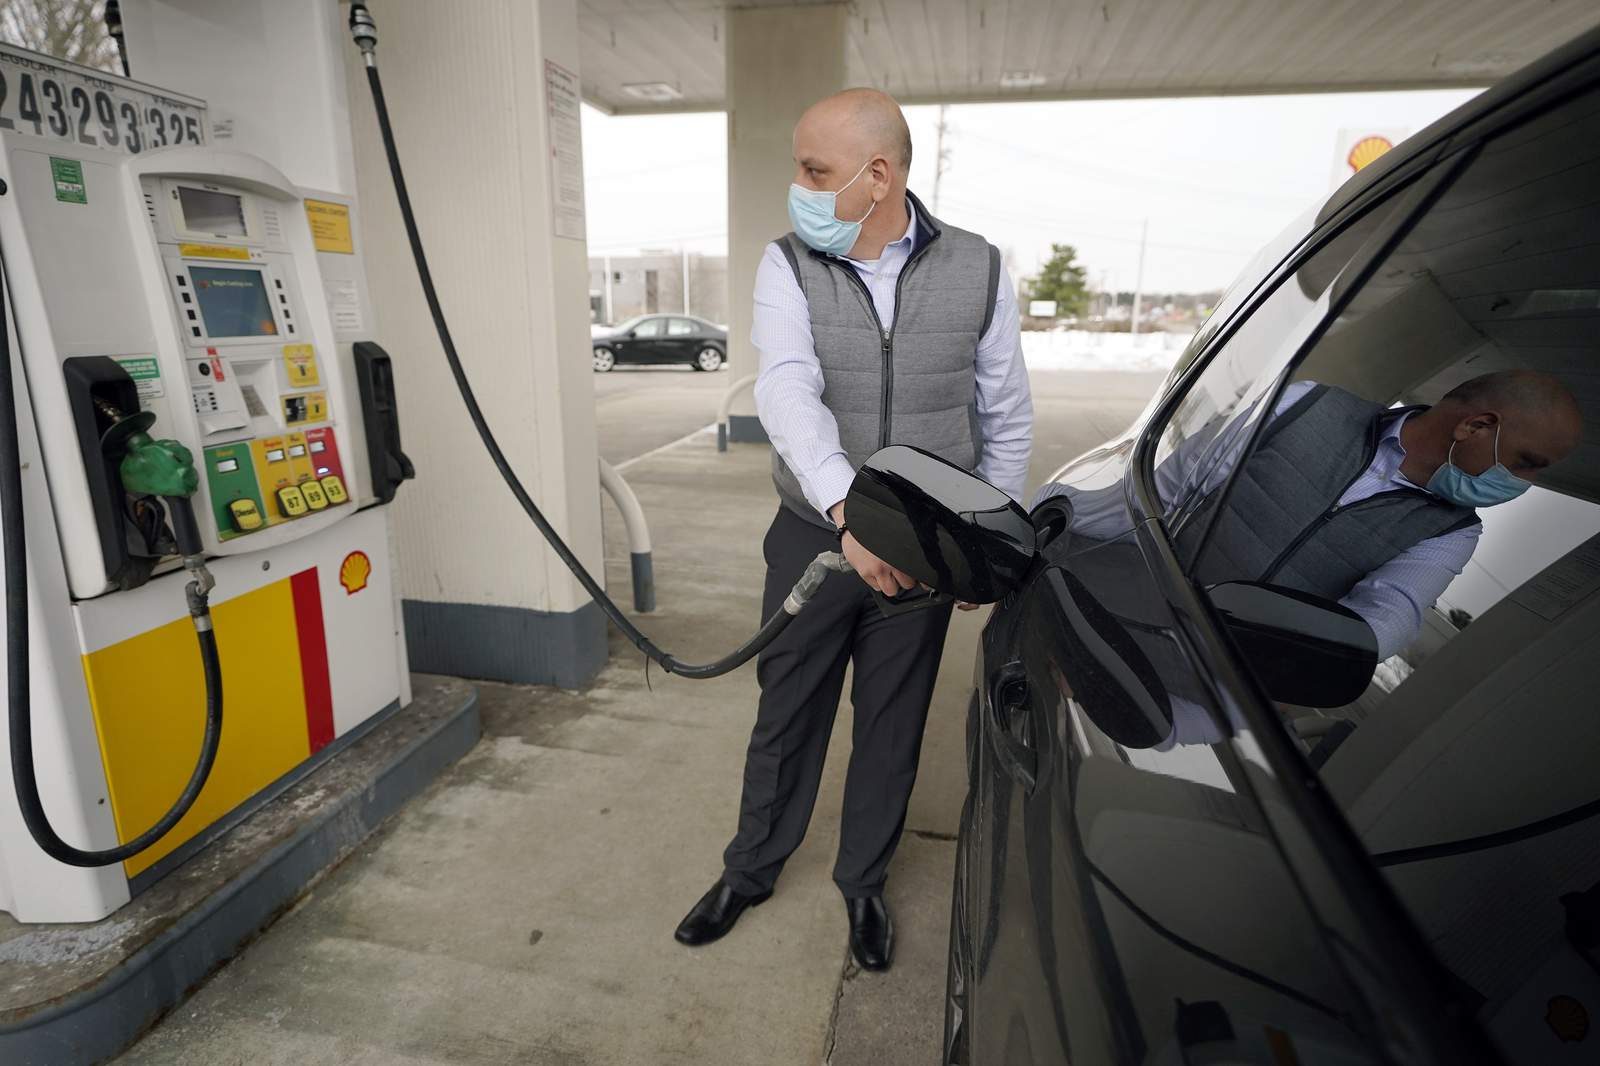 Gas prices keep getting pumped up. Is there an end in sight?